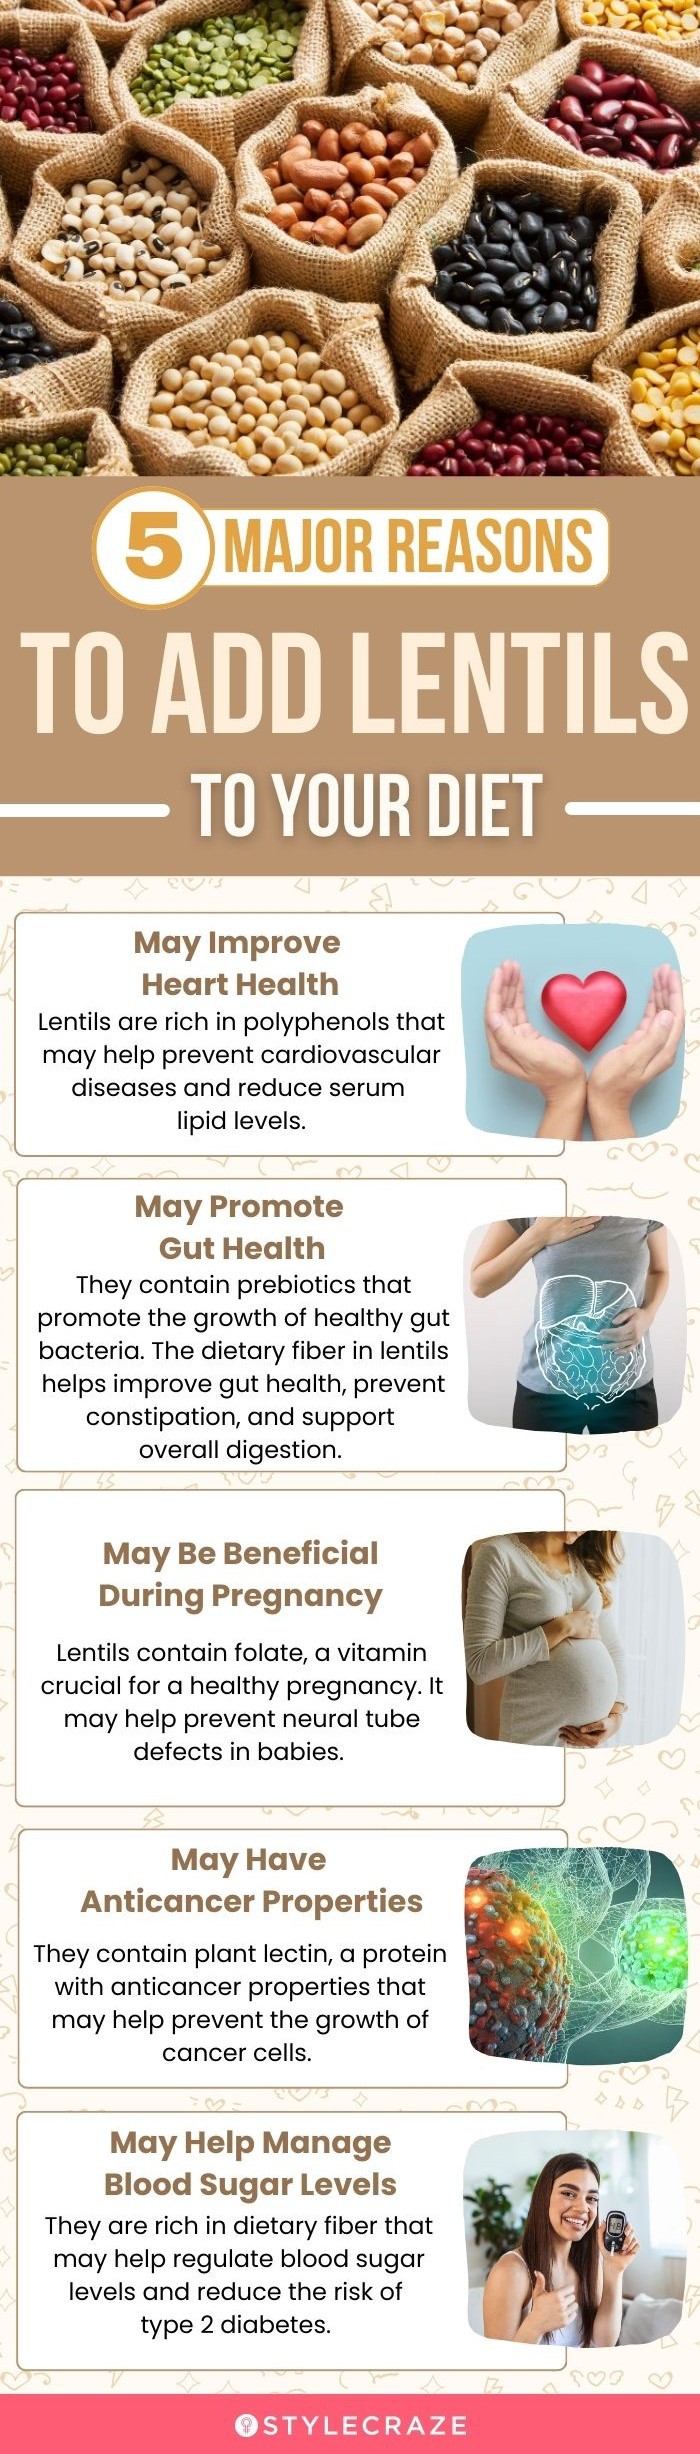 5 major reasons to add lentils to your diet (infographic)